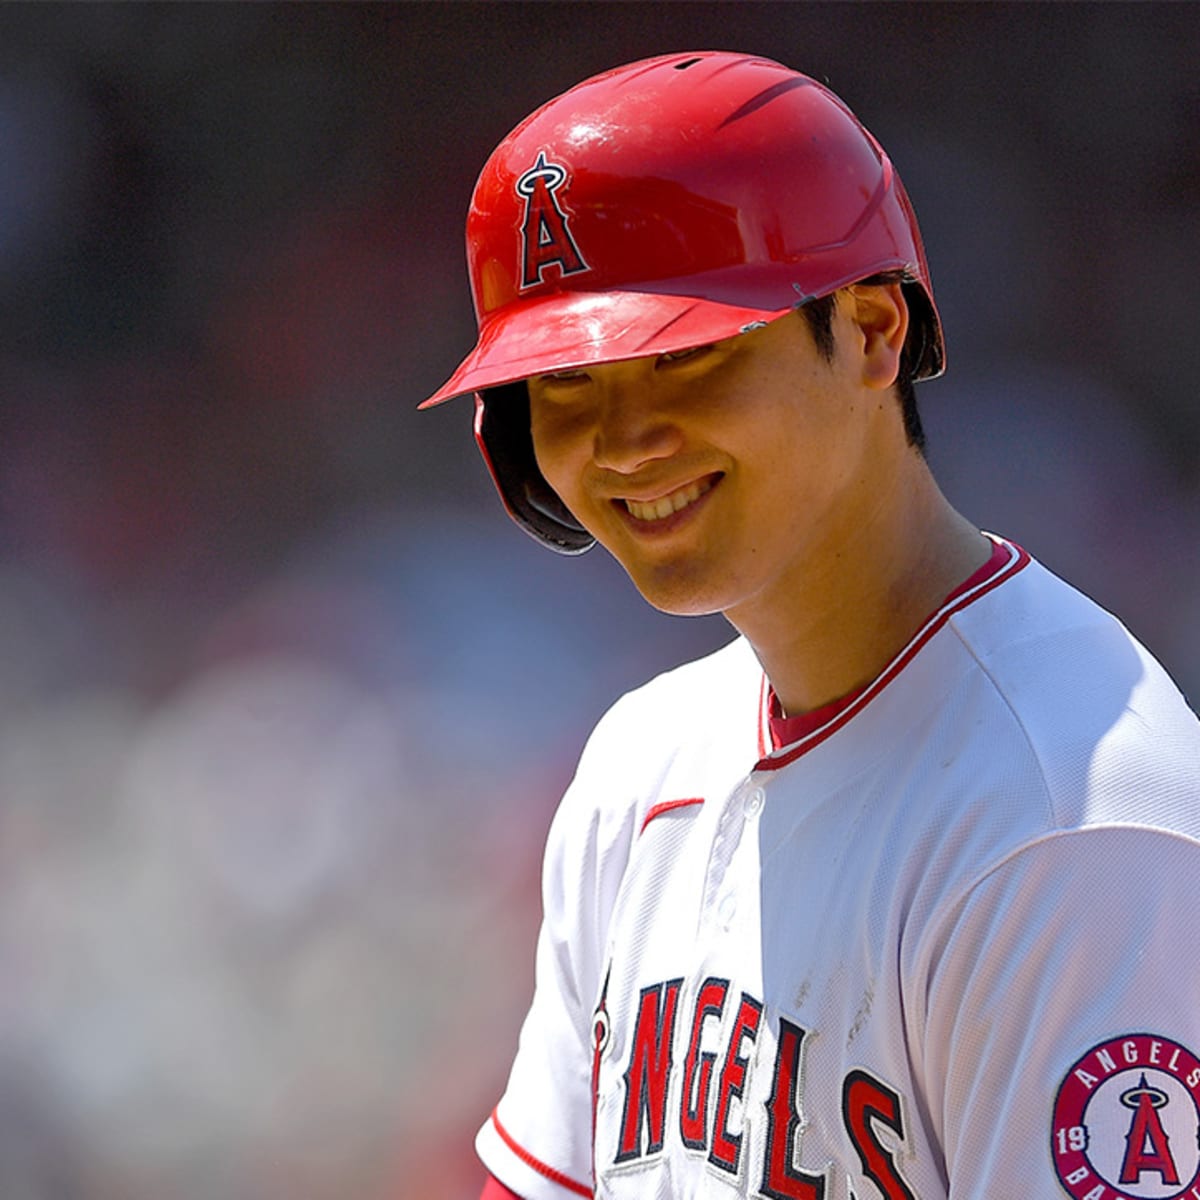 Sports Collectibles - 😯WOW! What a difference 2 years makes. 大谷翔平 Ohtani  Shohei is looking JACKED! 🏋️‍♀️On a side note, it looks like no more  pitching. #ROY #stud #SpringTraining2020 #othanim